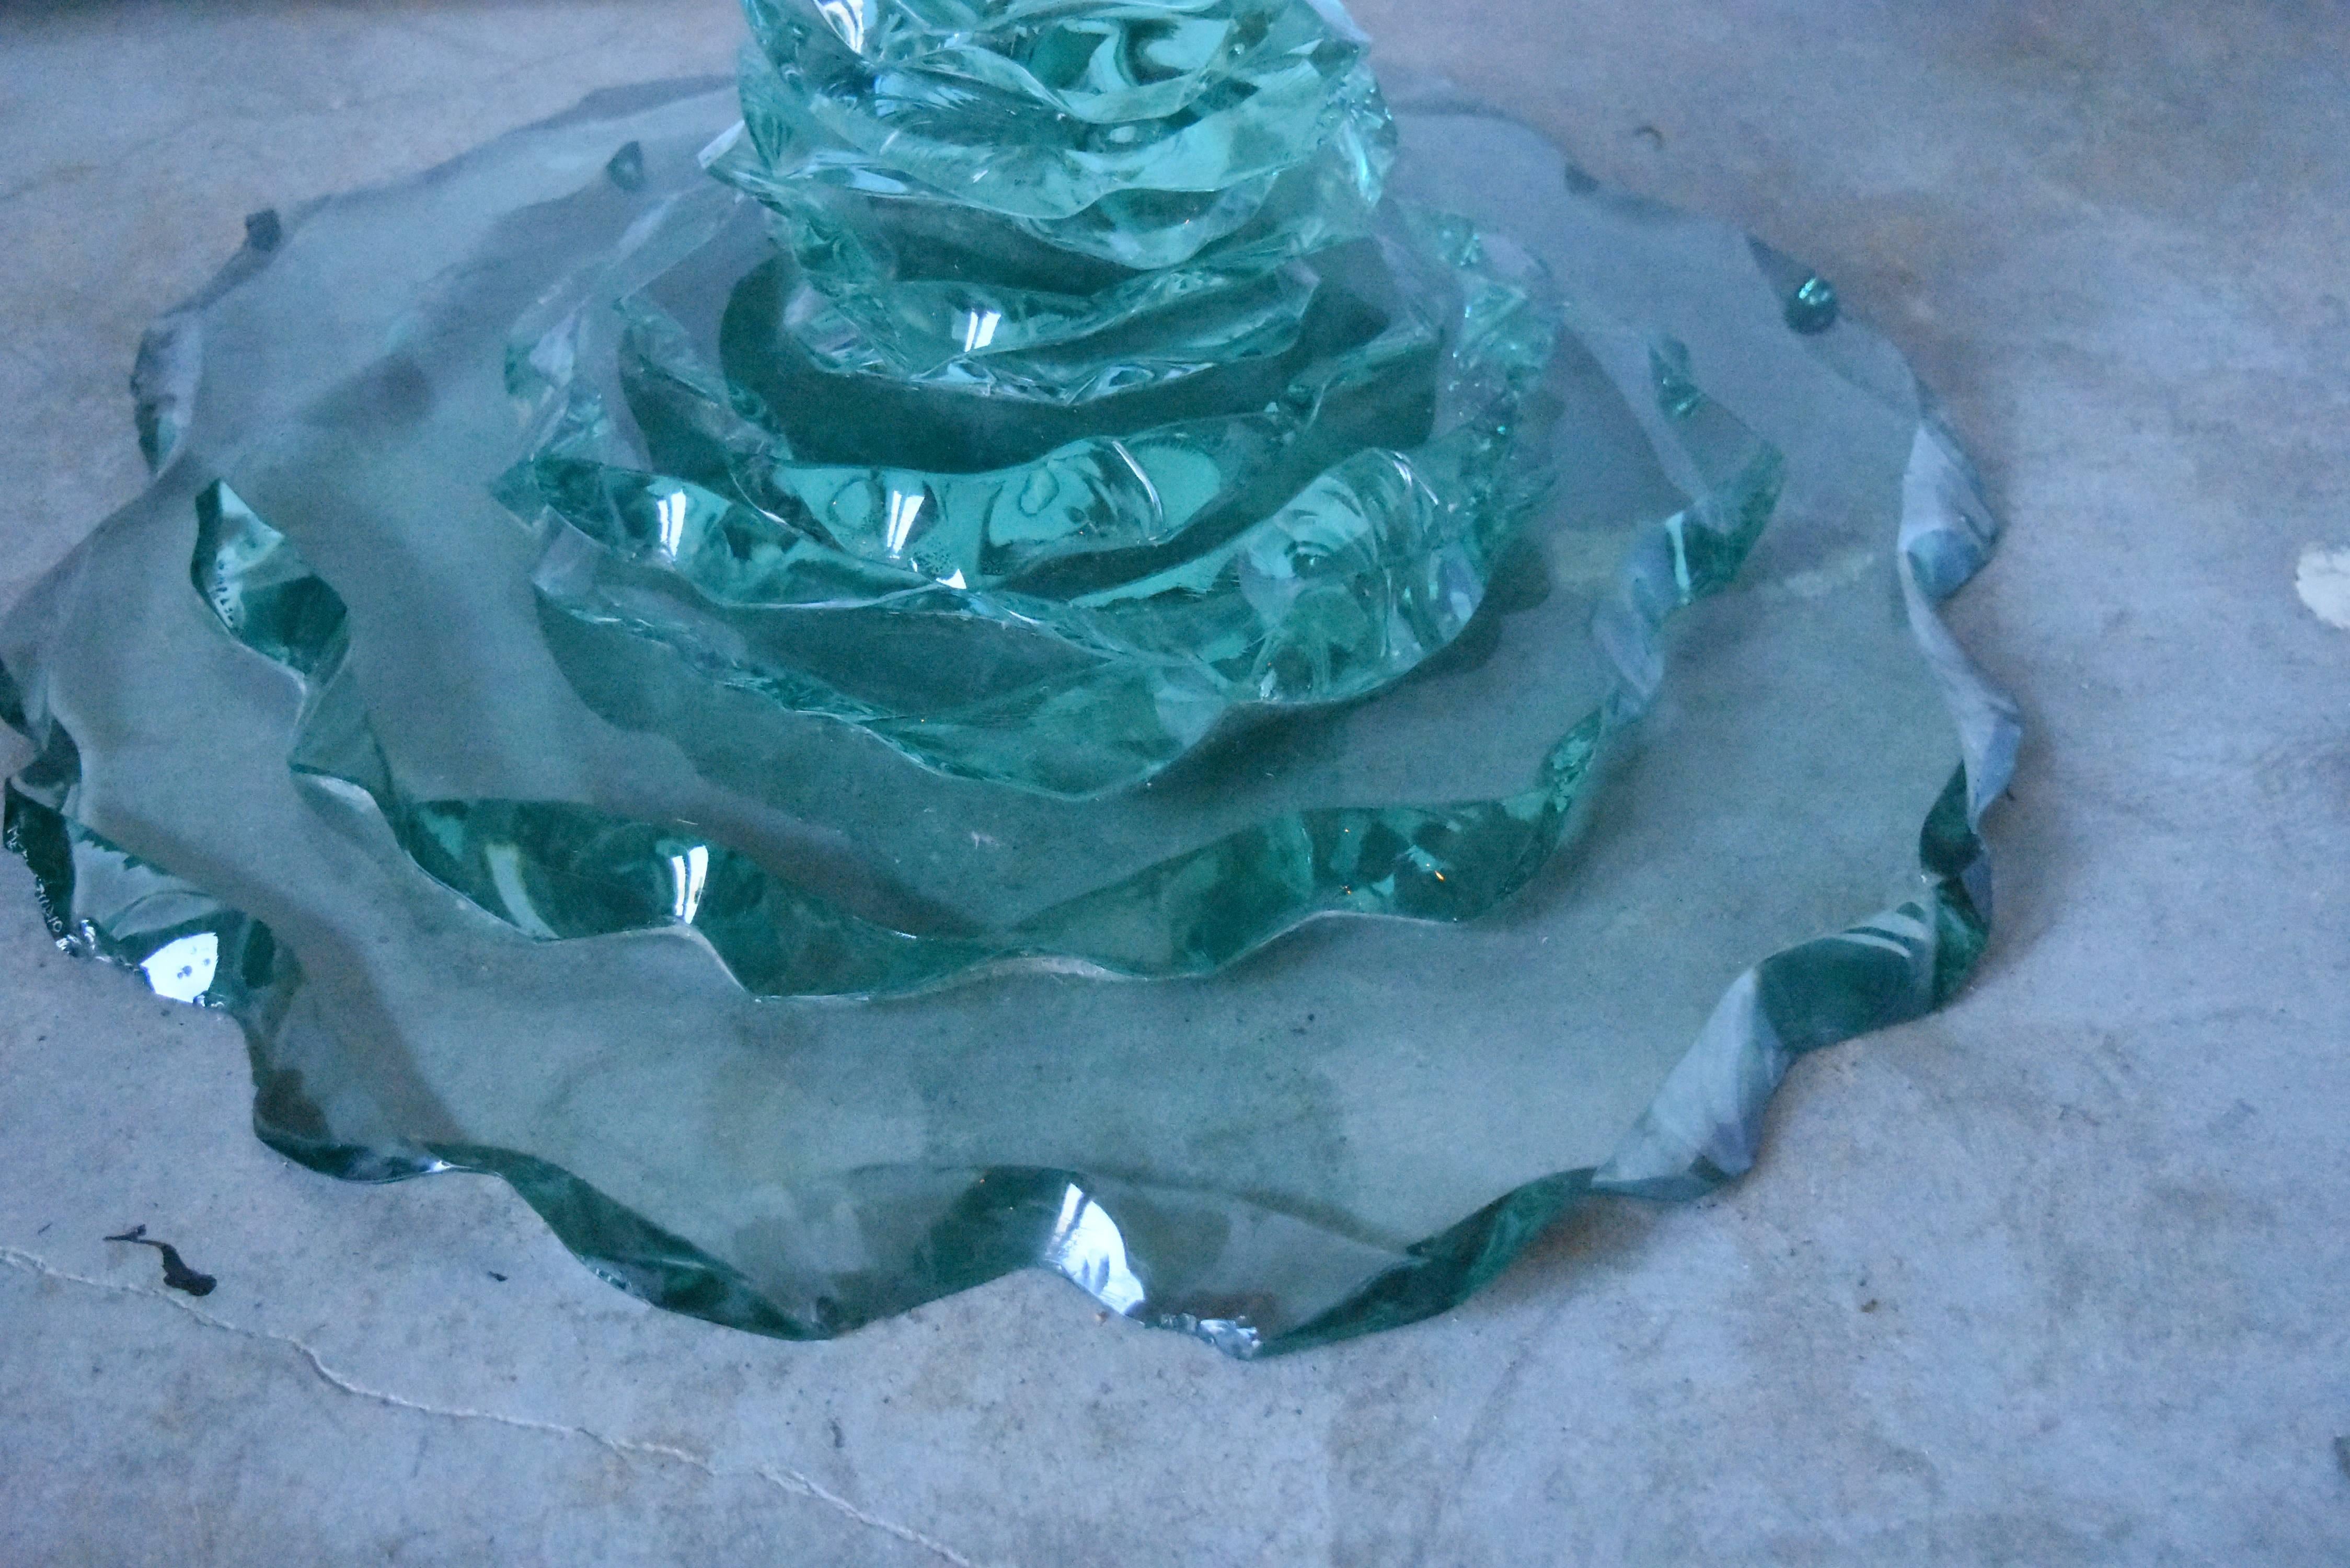 This is a beautiful glass table that is signed Meeks Studio on bottom. It's a table designed by Texas Artist Bill Meeks who is know for his signature glass sculptures.
The top dimension is 38 wide x 34 deep x 28.25 tall. It's two pieces. The base